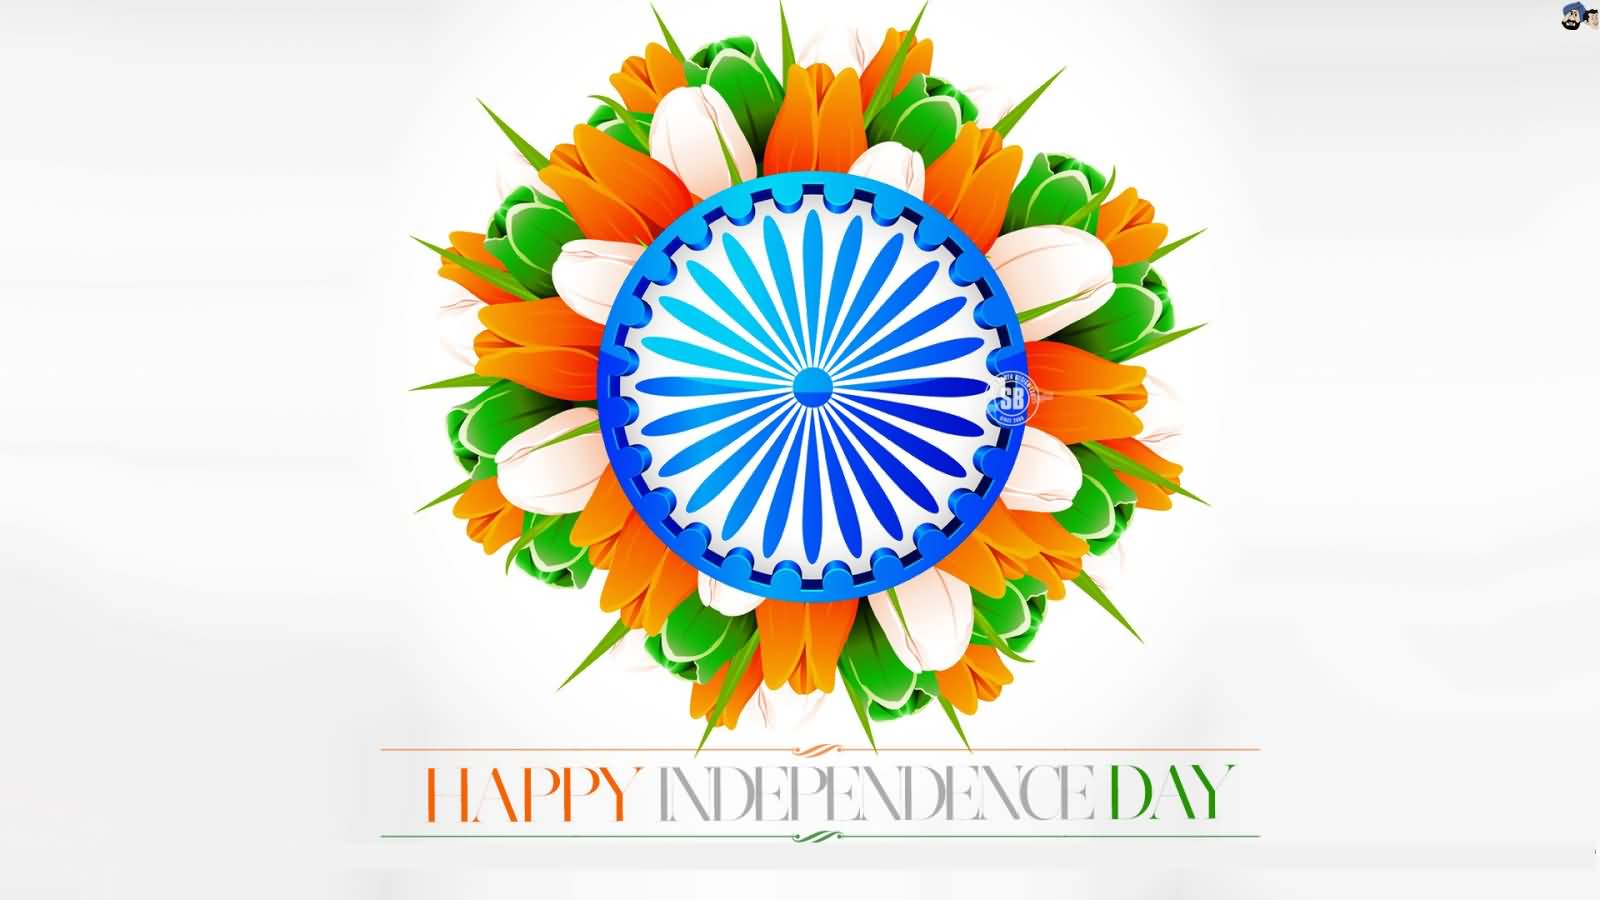 60 Most Beautiful Greeting Pictures Of Independence Day Of India